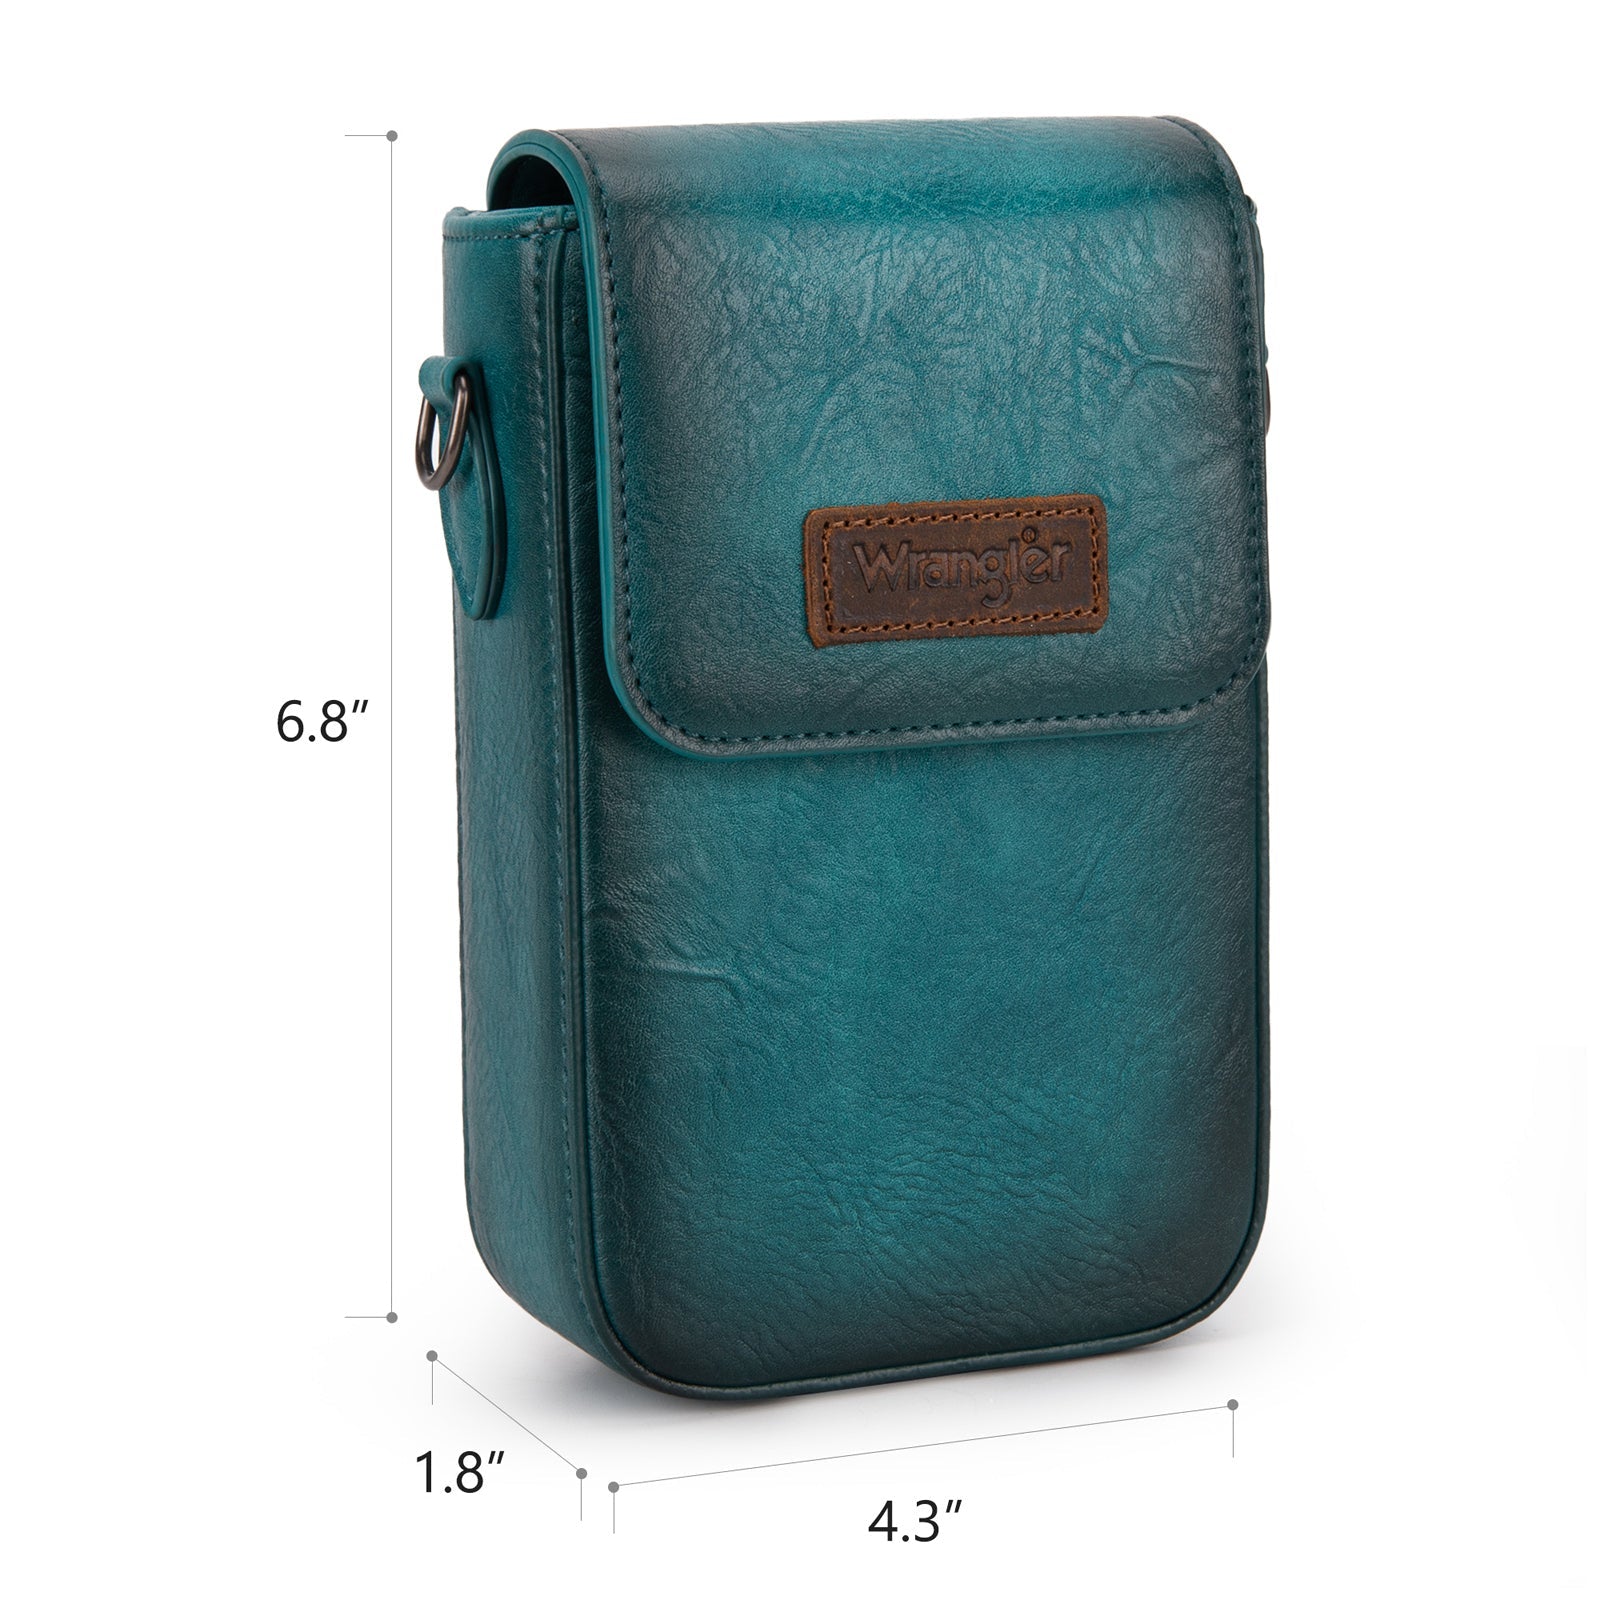 WG118-204  Wrangler Crossbody Cell Phone Purse With Back Card Slots - Turquoise